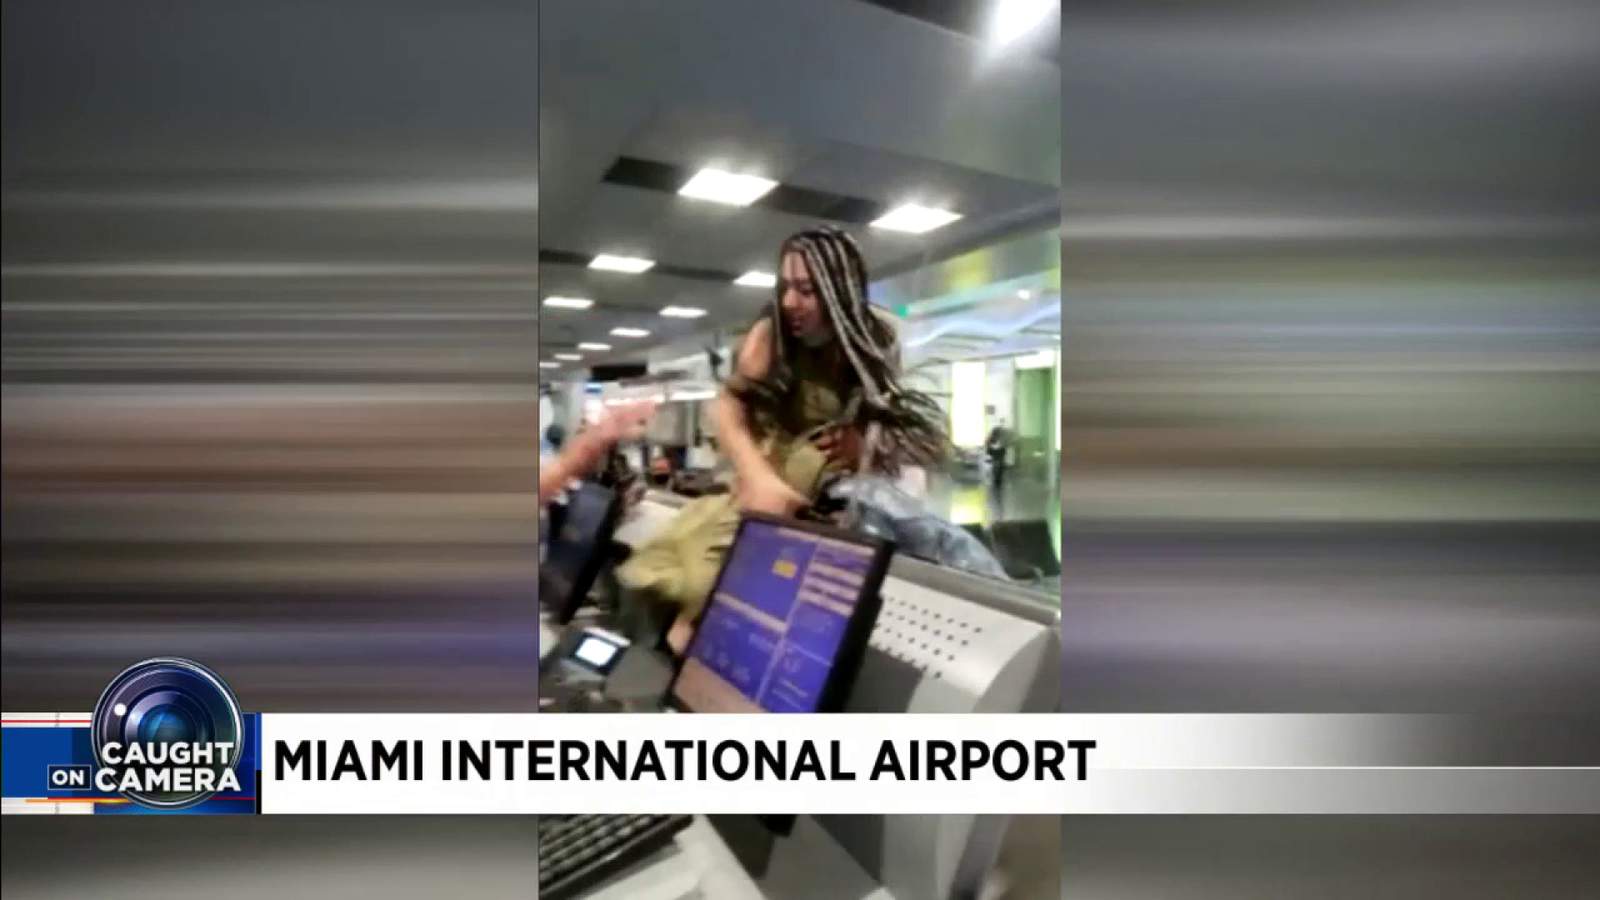 Video shows woman jump over ticket counter during meltdown at Miami International Airport